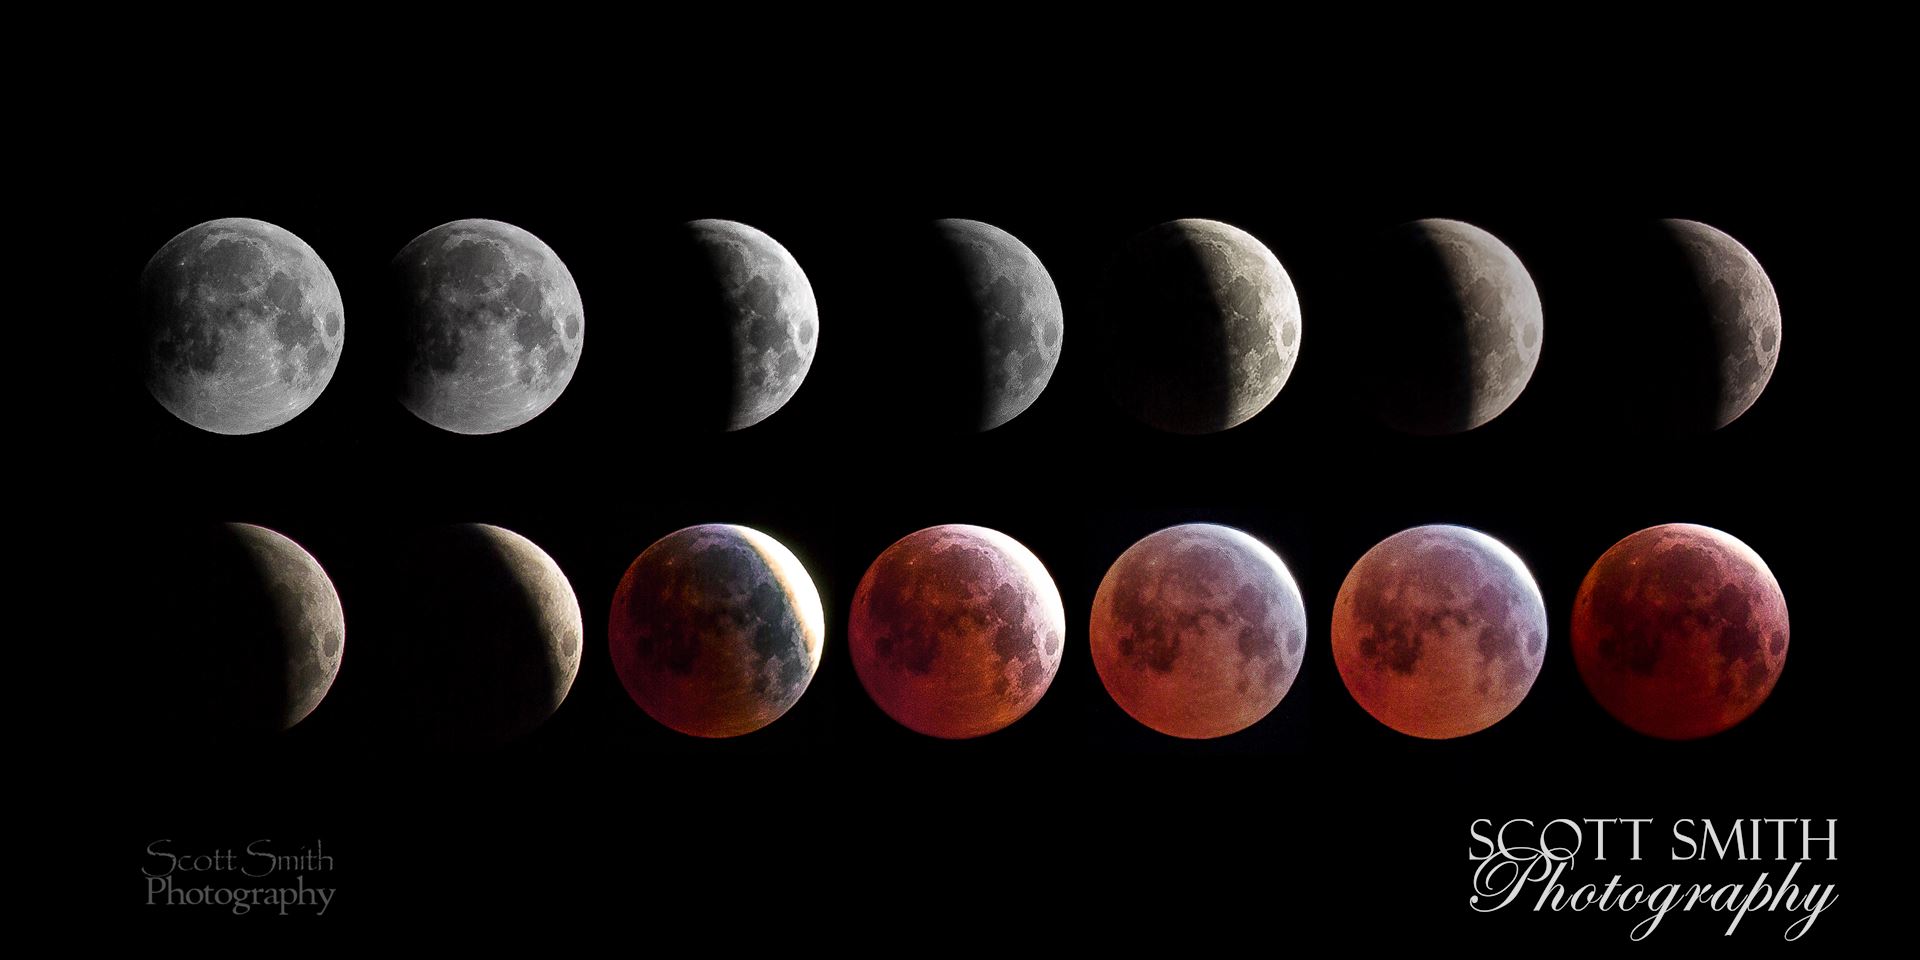 April 4 2015 Eclipse Collage - A collage of 14 images from the spring 2015 lunar eclipse, showing the different phases of the moon. by Scott Smith Photos